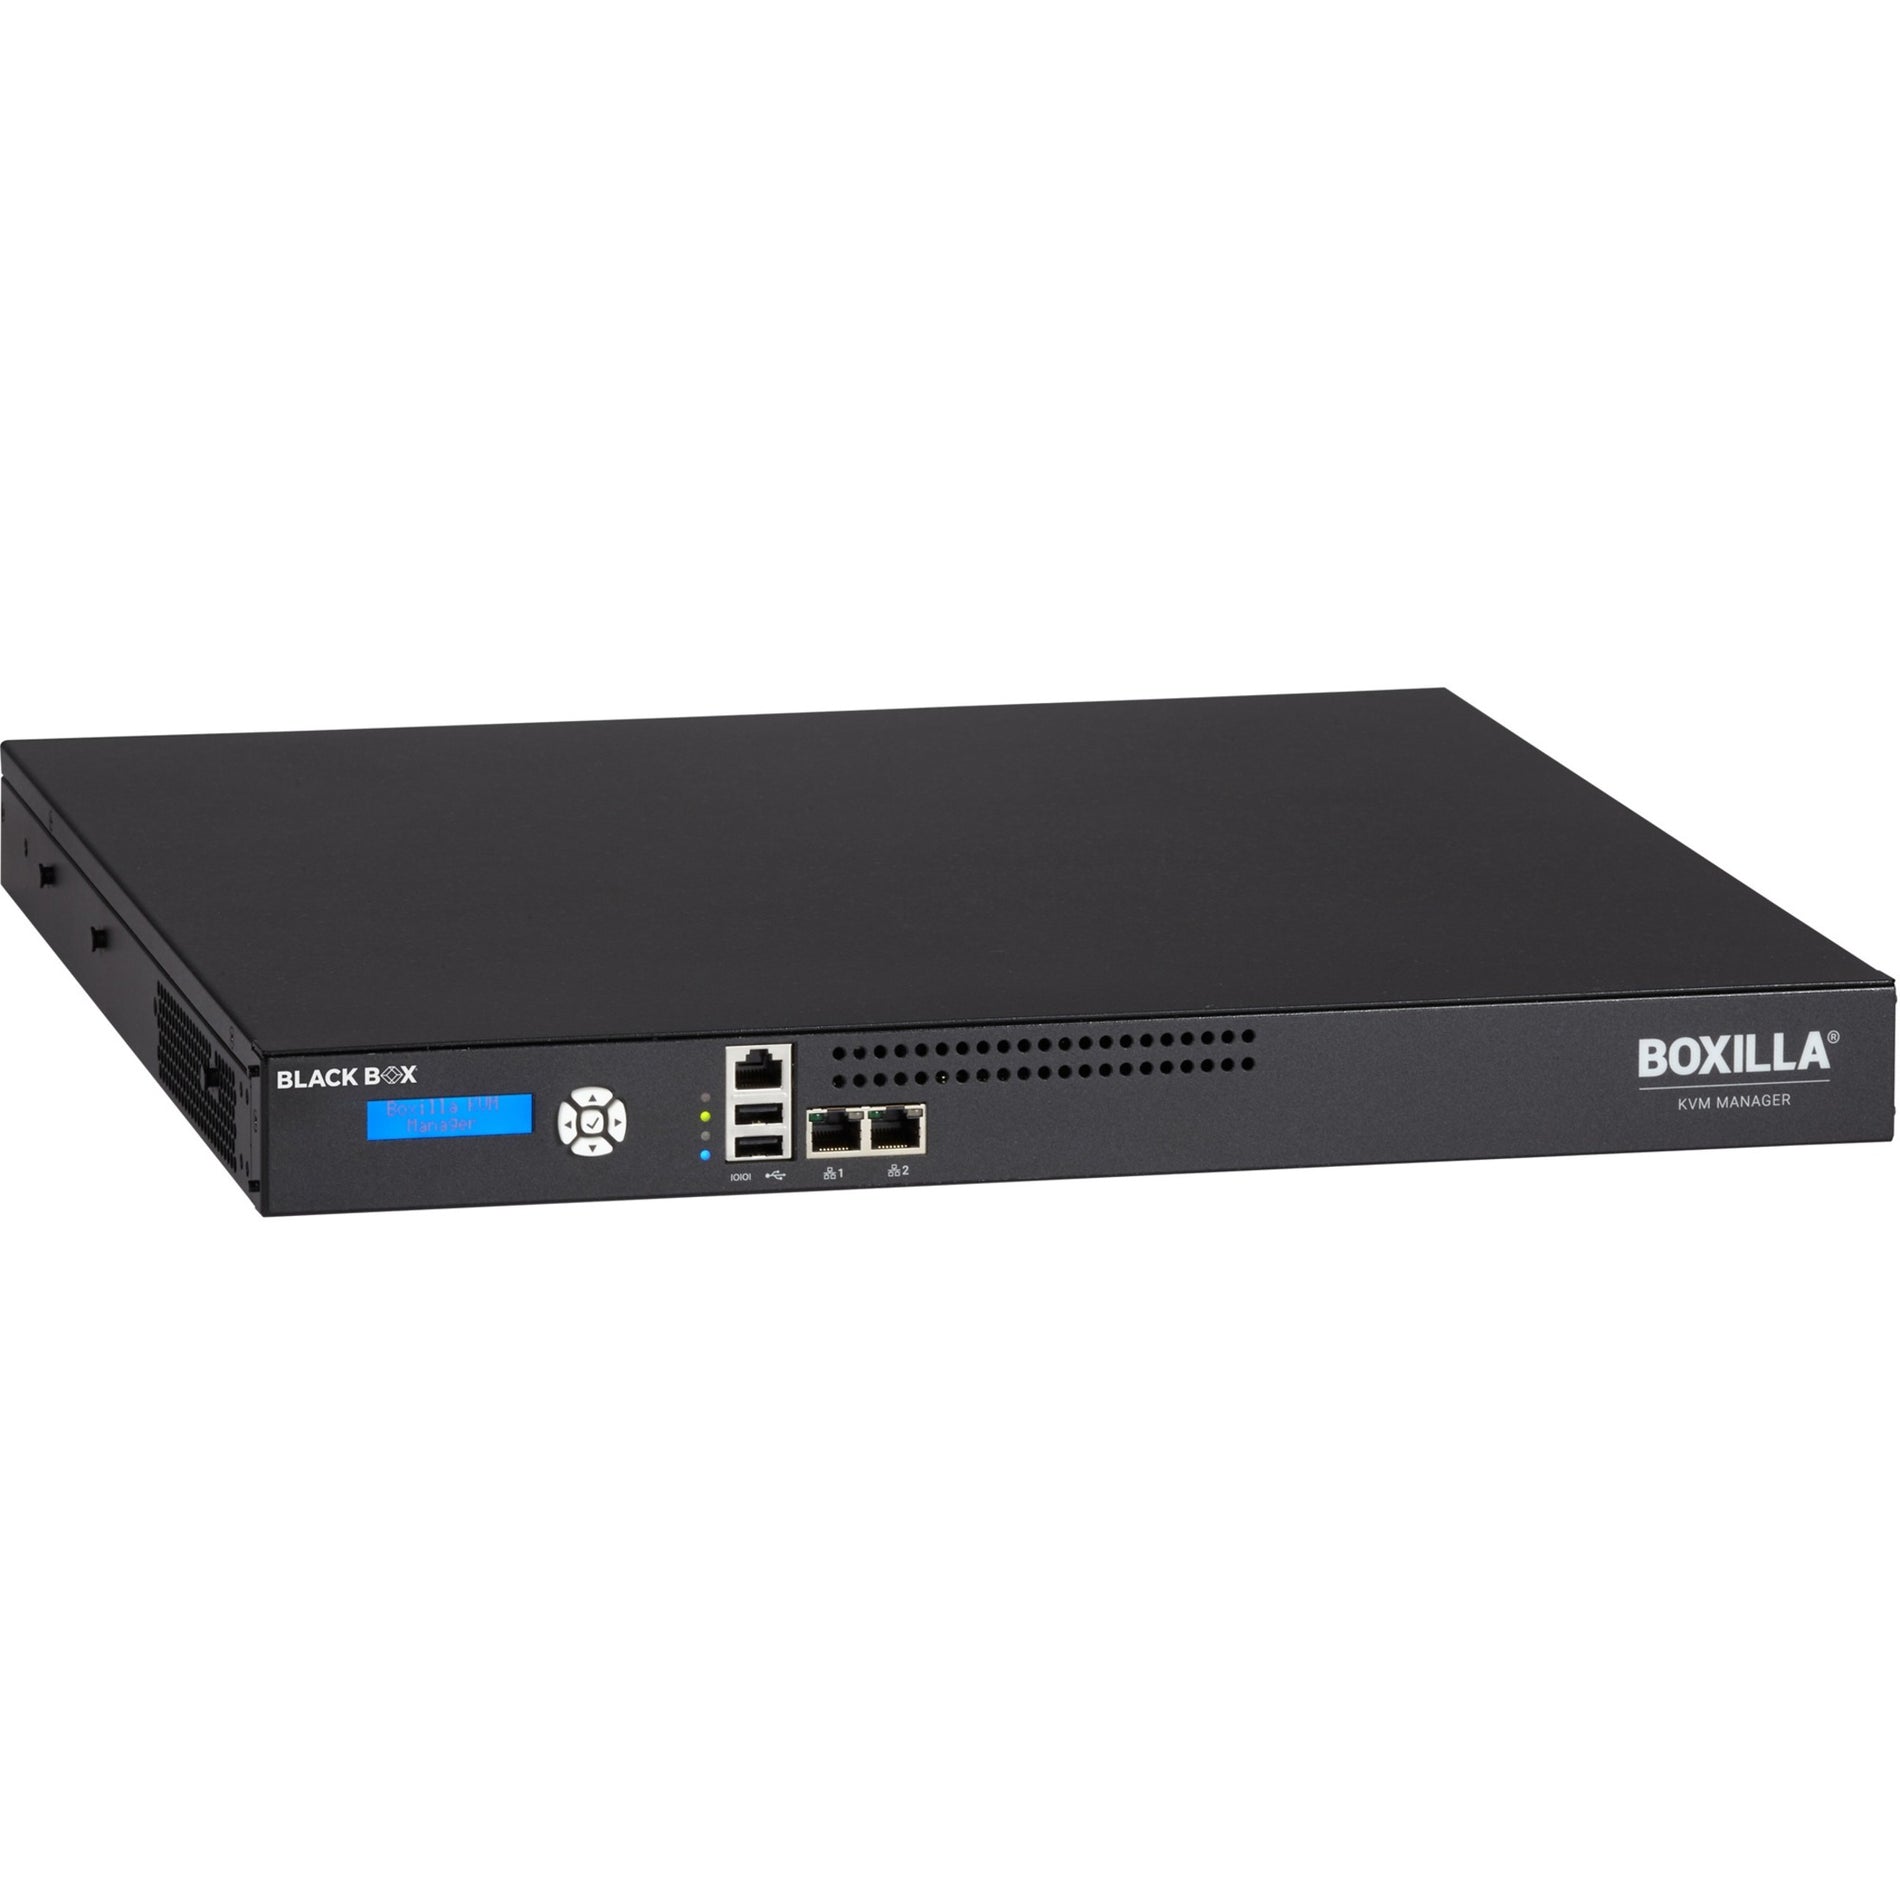 Black Box BXAMGR-R2-225 Boxilla KVM Manager with 225-Device License, USB, Network (RJ-45), TAA Compliant, RoHS 2, RoHS, WEEE, Rack-mountable, 1U